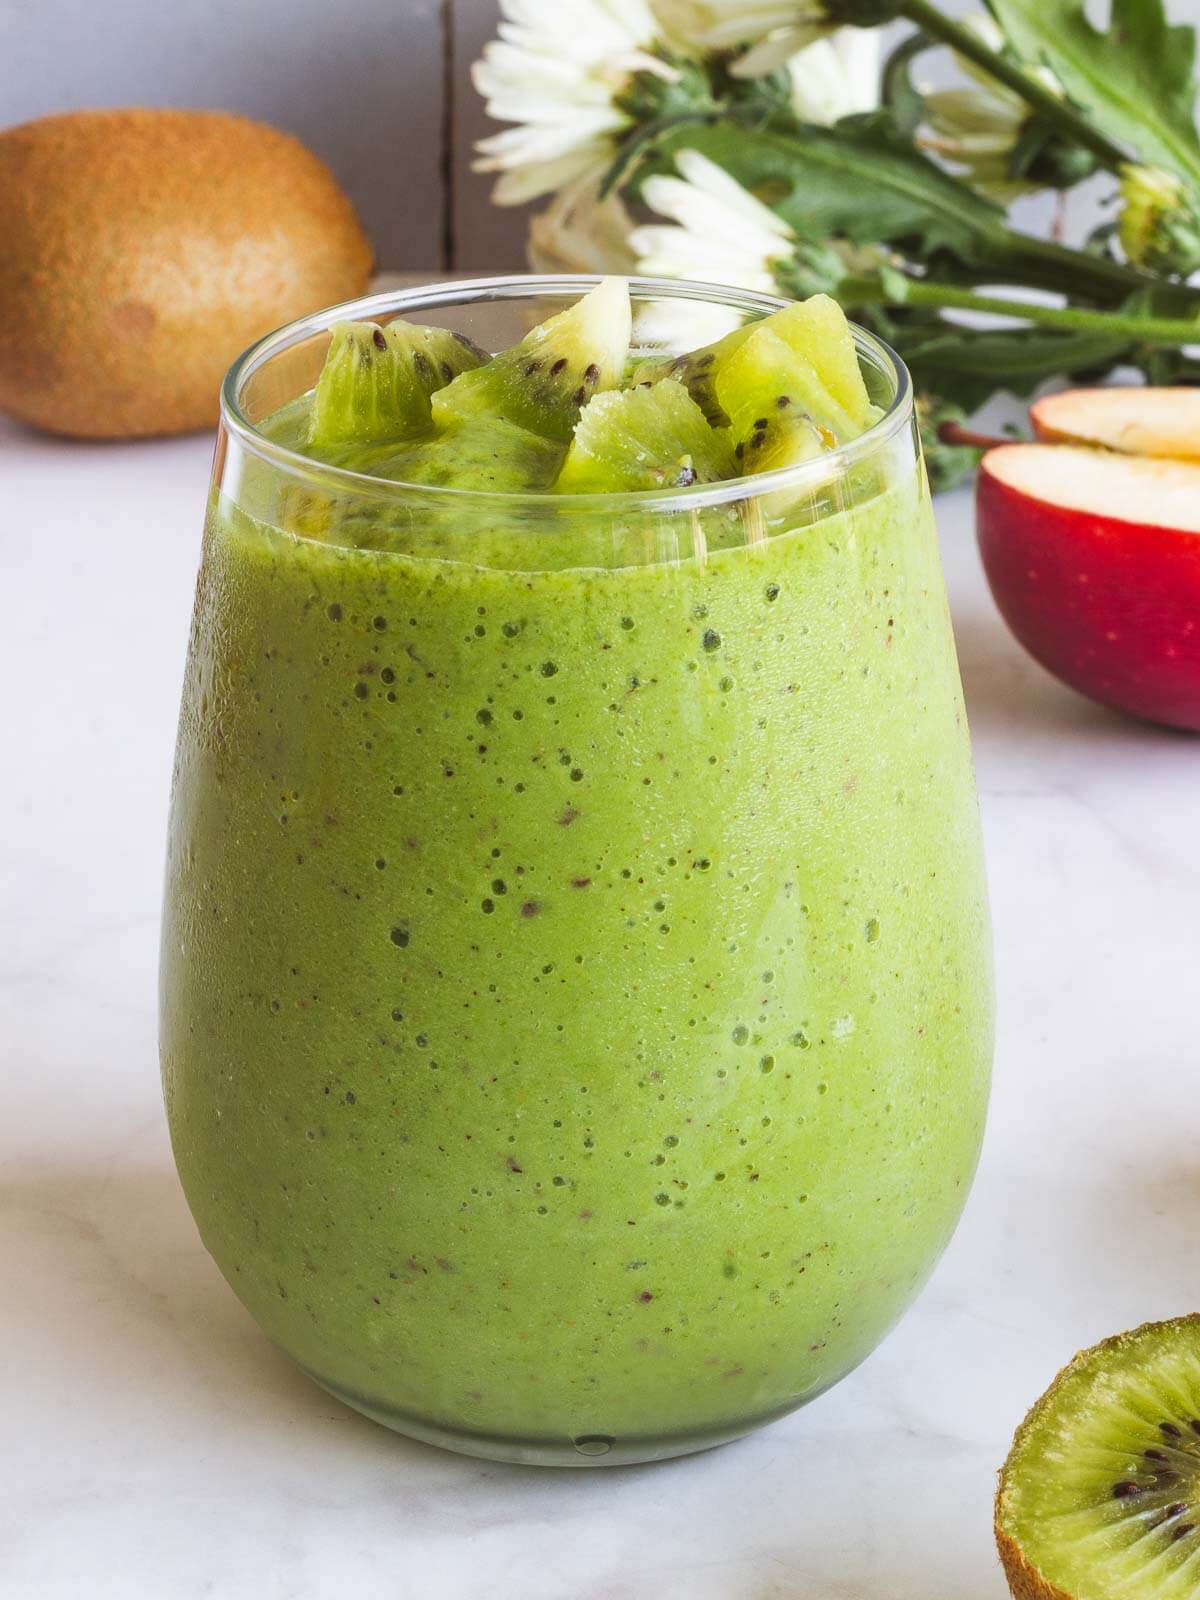 serve the apple spinach smoothie with small kiwi chunks